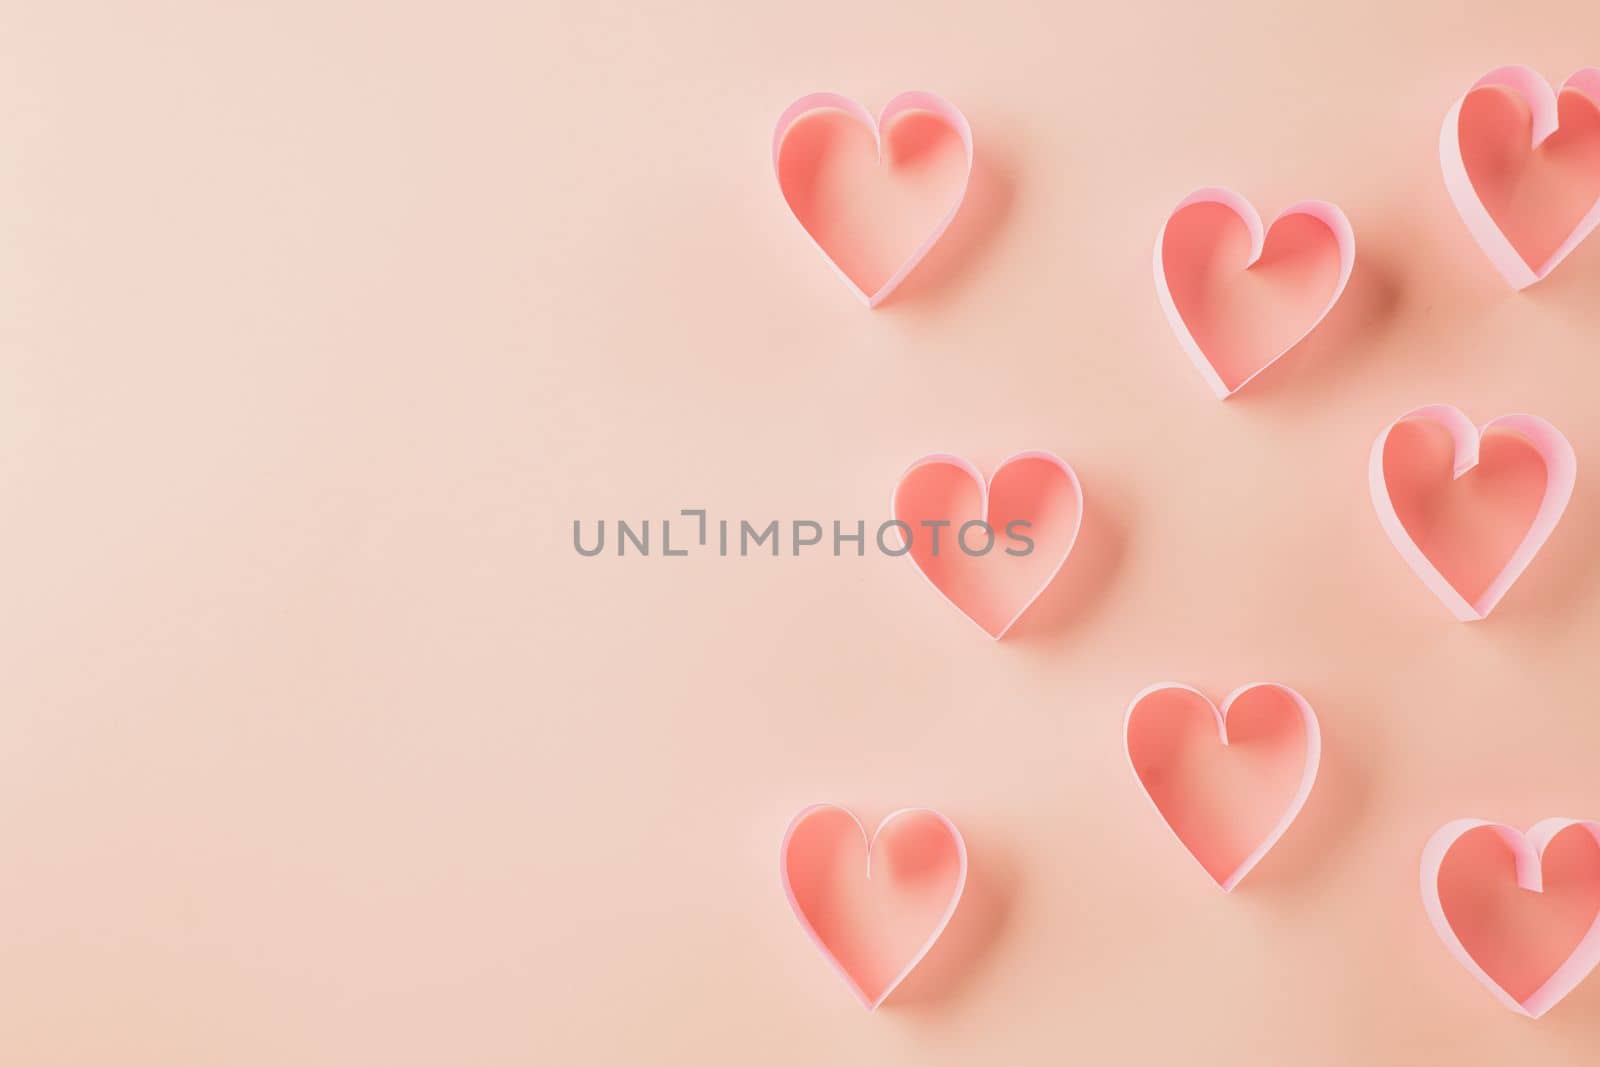 Top view flat lay pink ribbon heart shaped decorative symbol on pastel pink background, love romance concept, banner design with copy space, Mother, Woman day, Happy Valentines Day